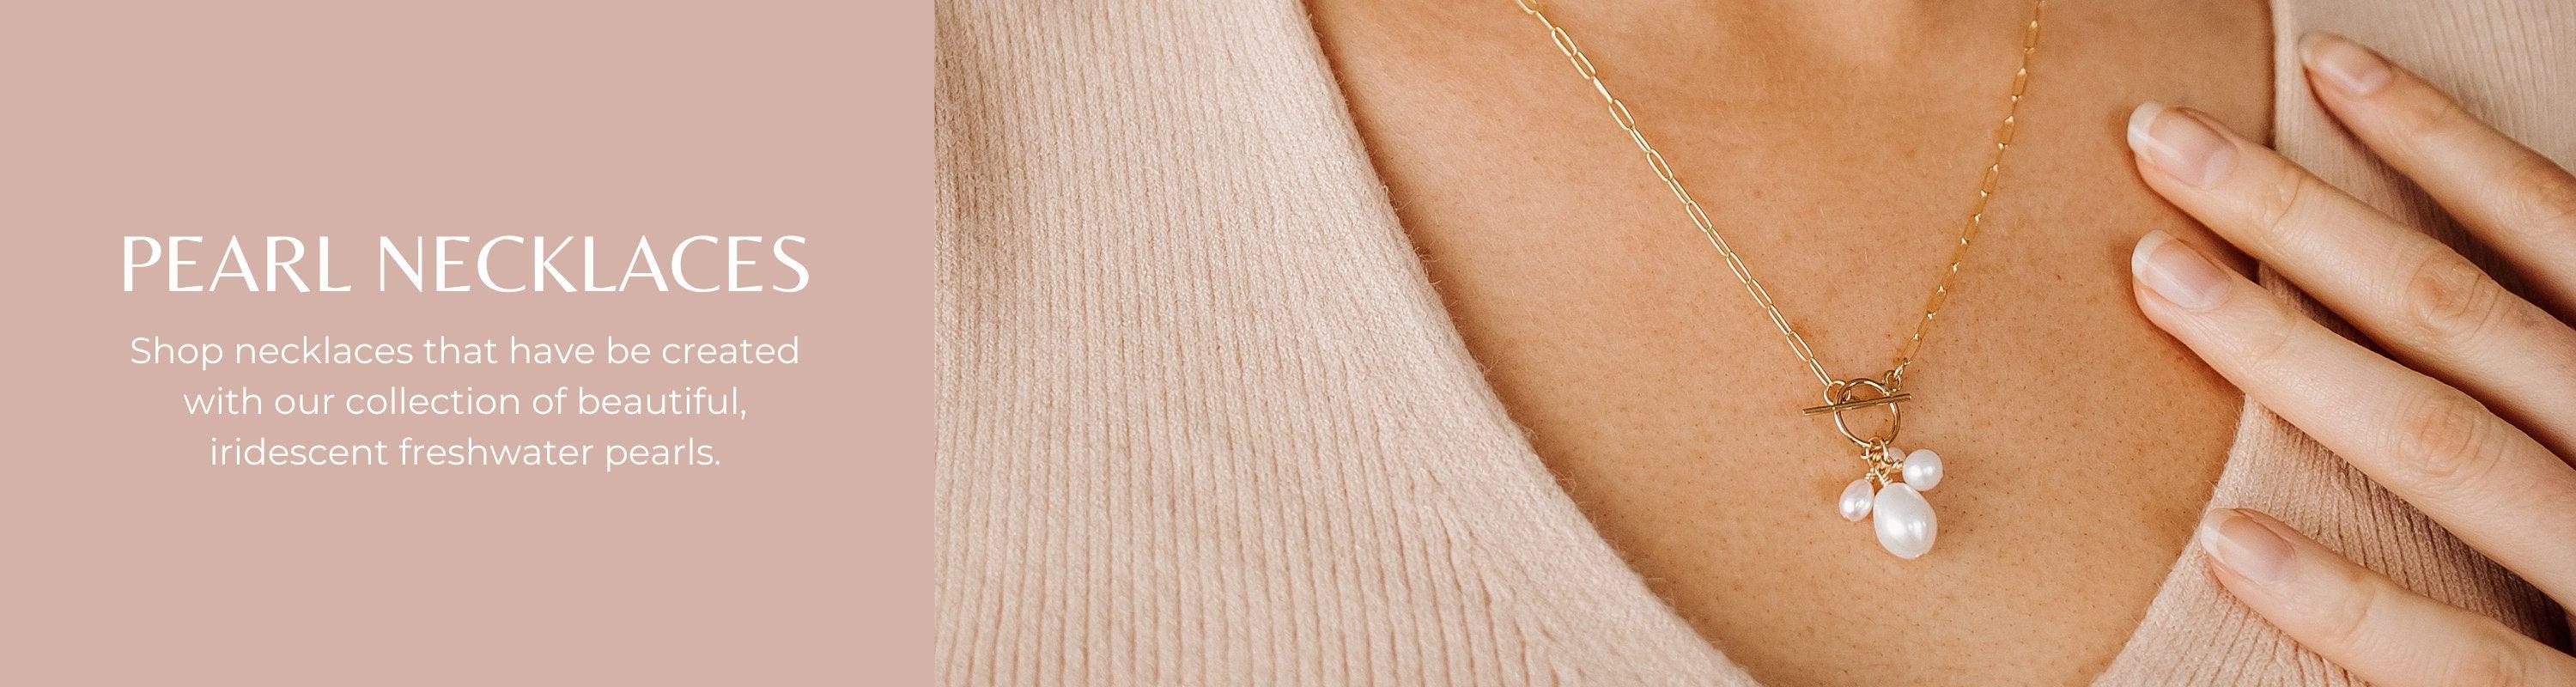 Pearl Necklaces - Nolia Jewelry - Meaningful + Sustainably Handcrafted Jewelry